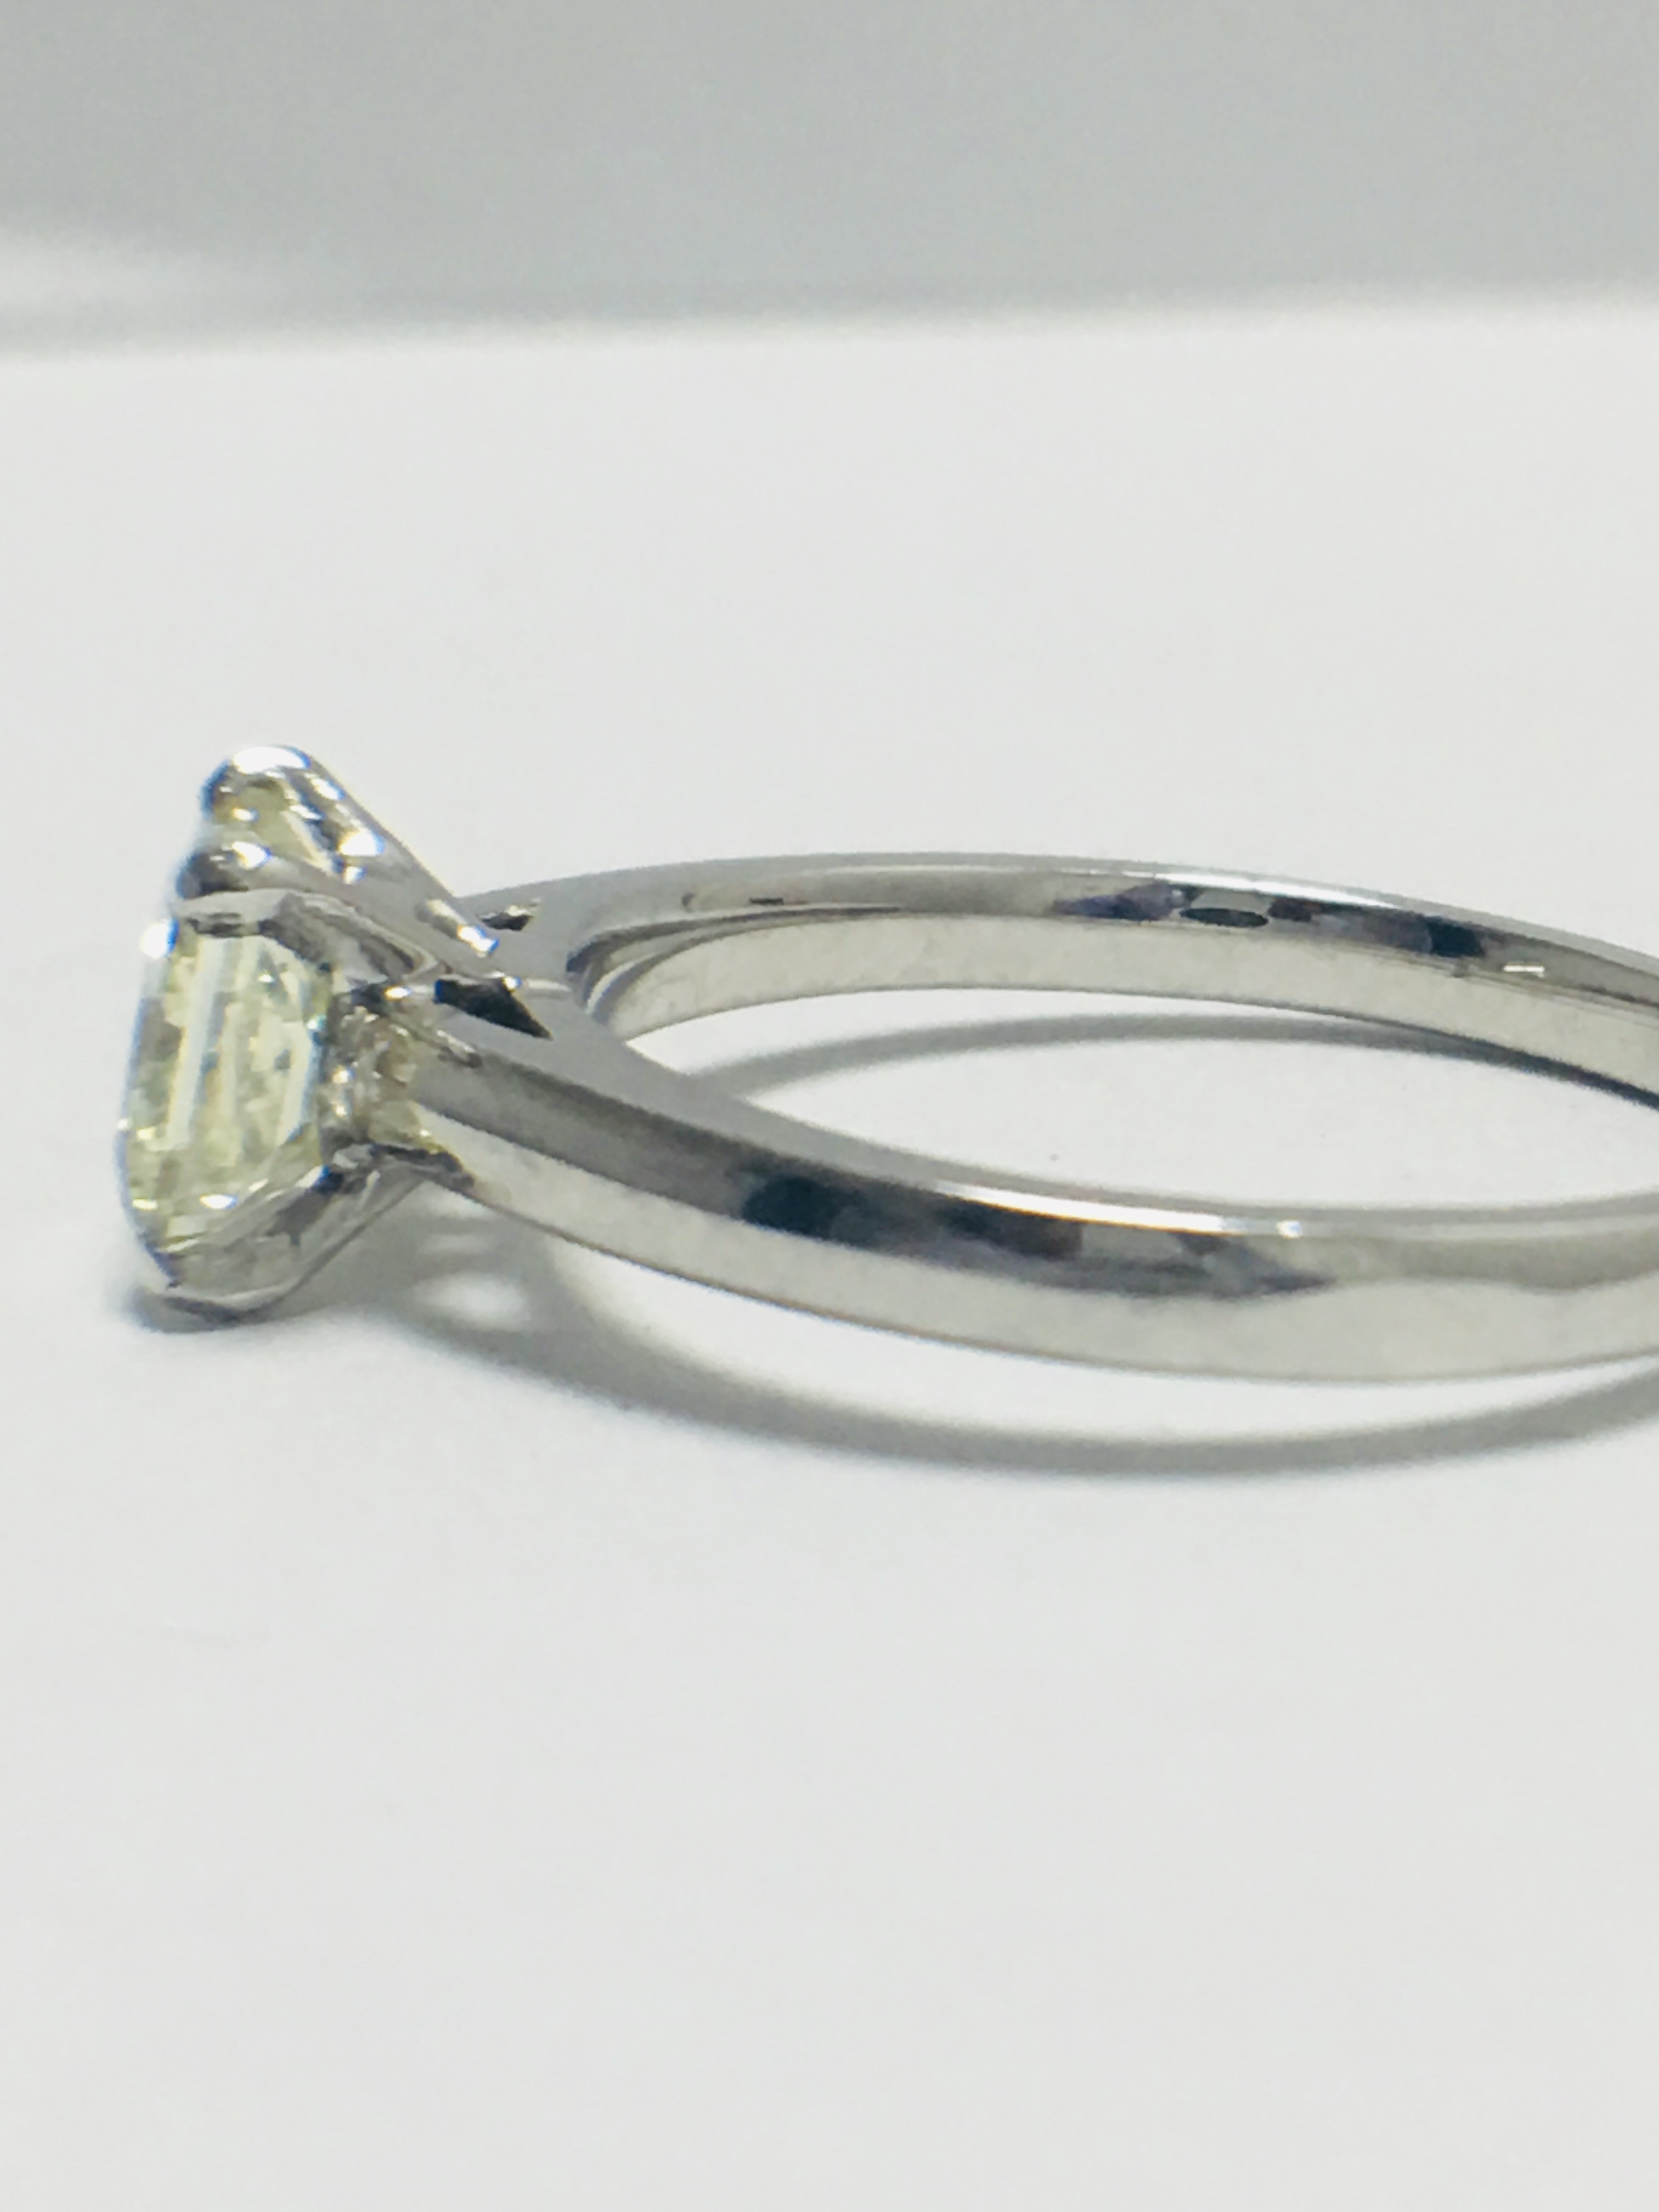 1ct princess cut solitaire ring - Image 2 of 6